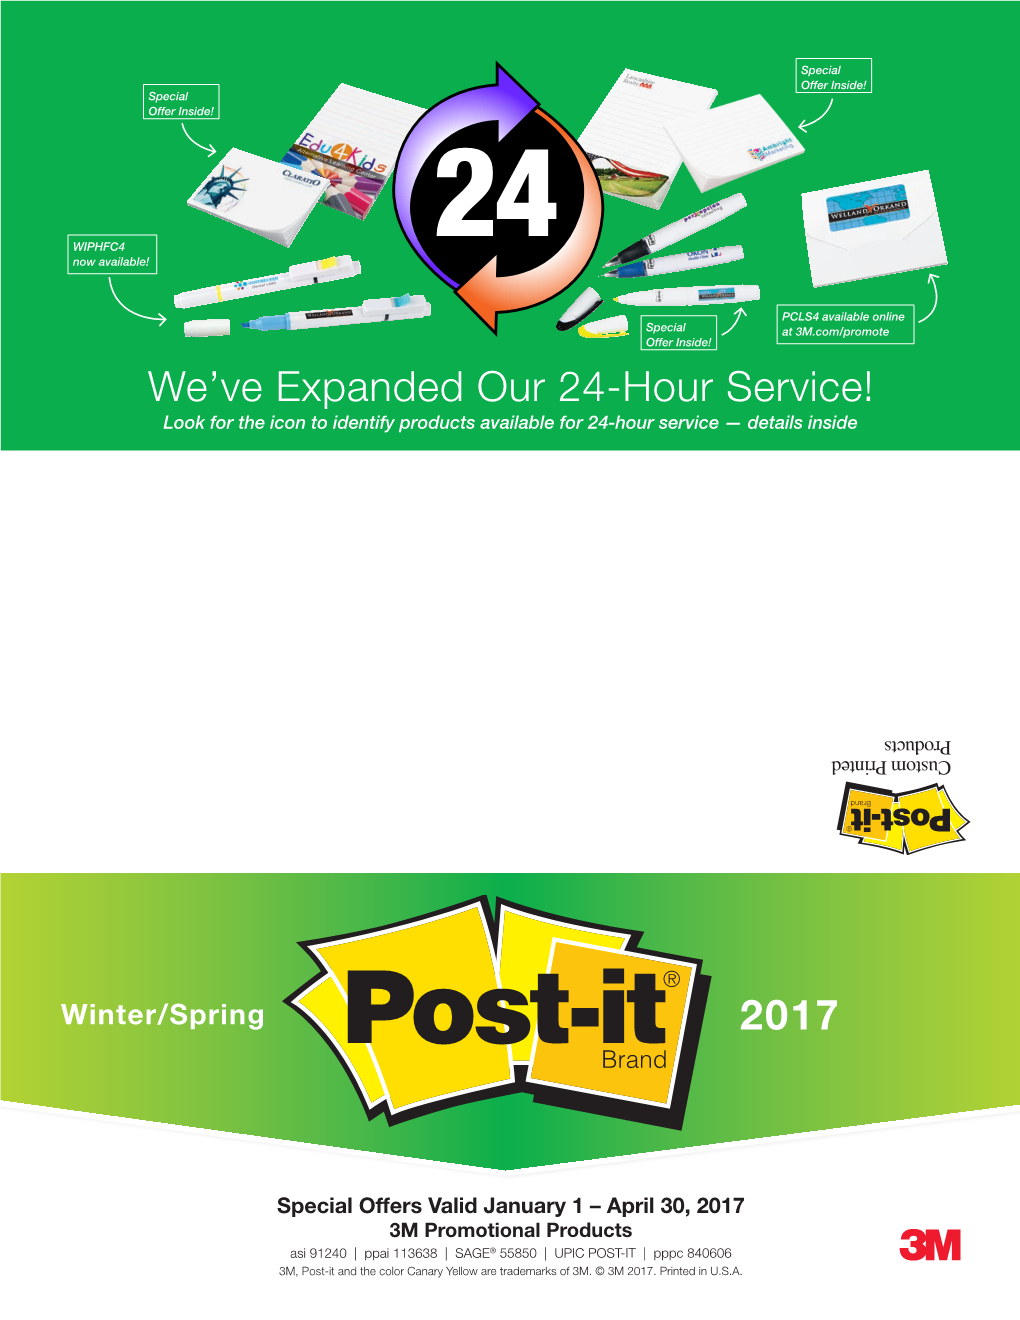 We've Expanded Our 24-Hour Service! 2017